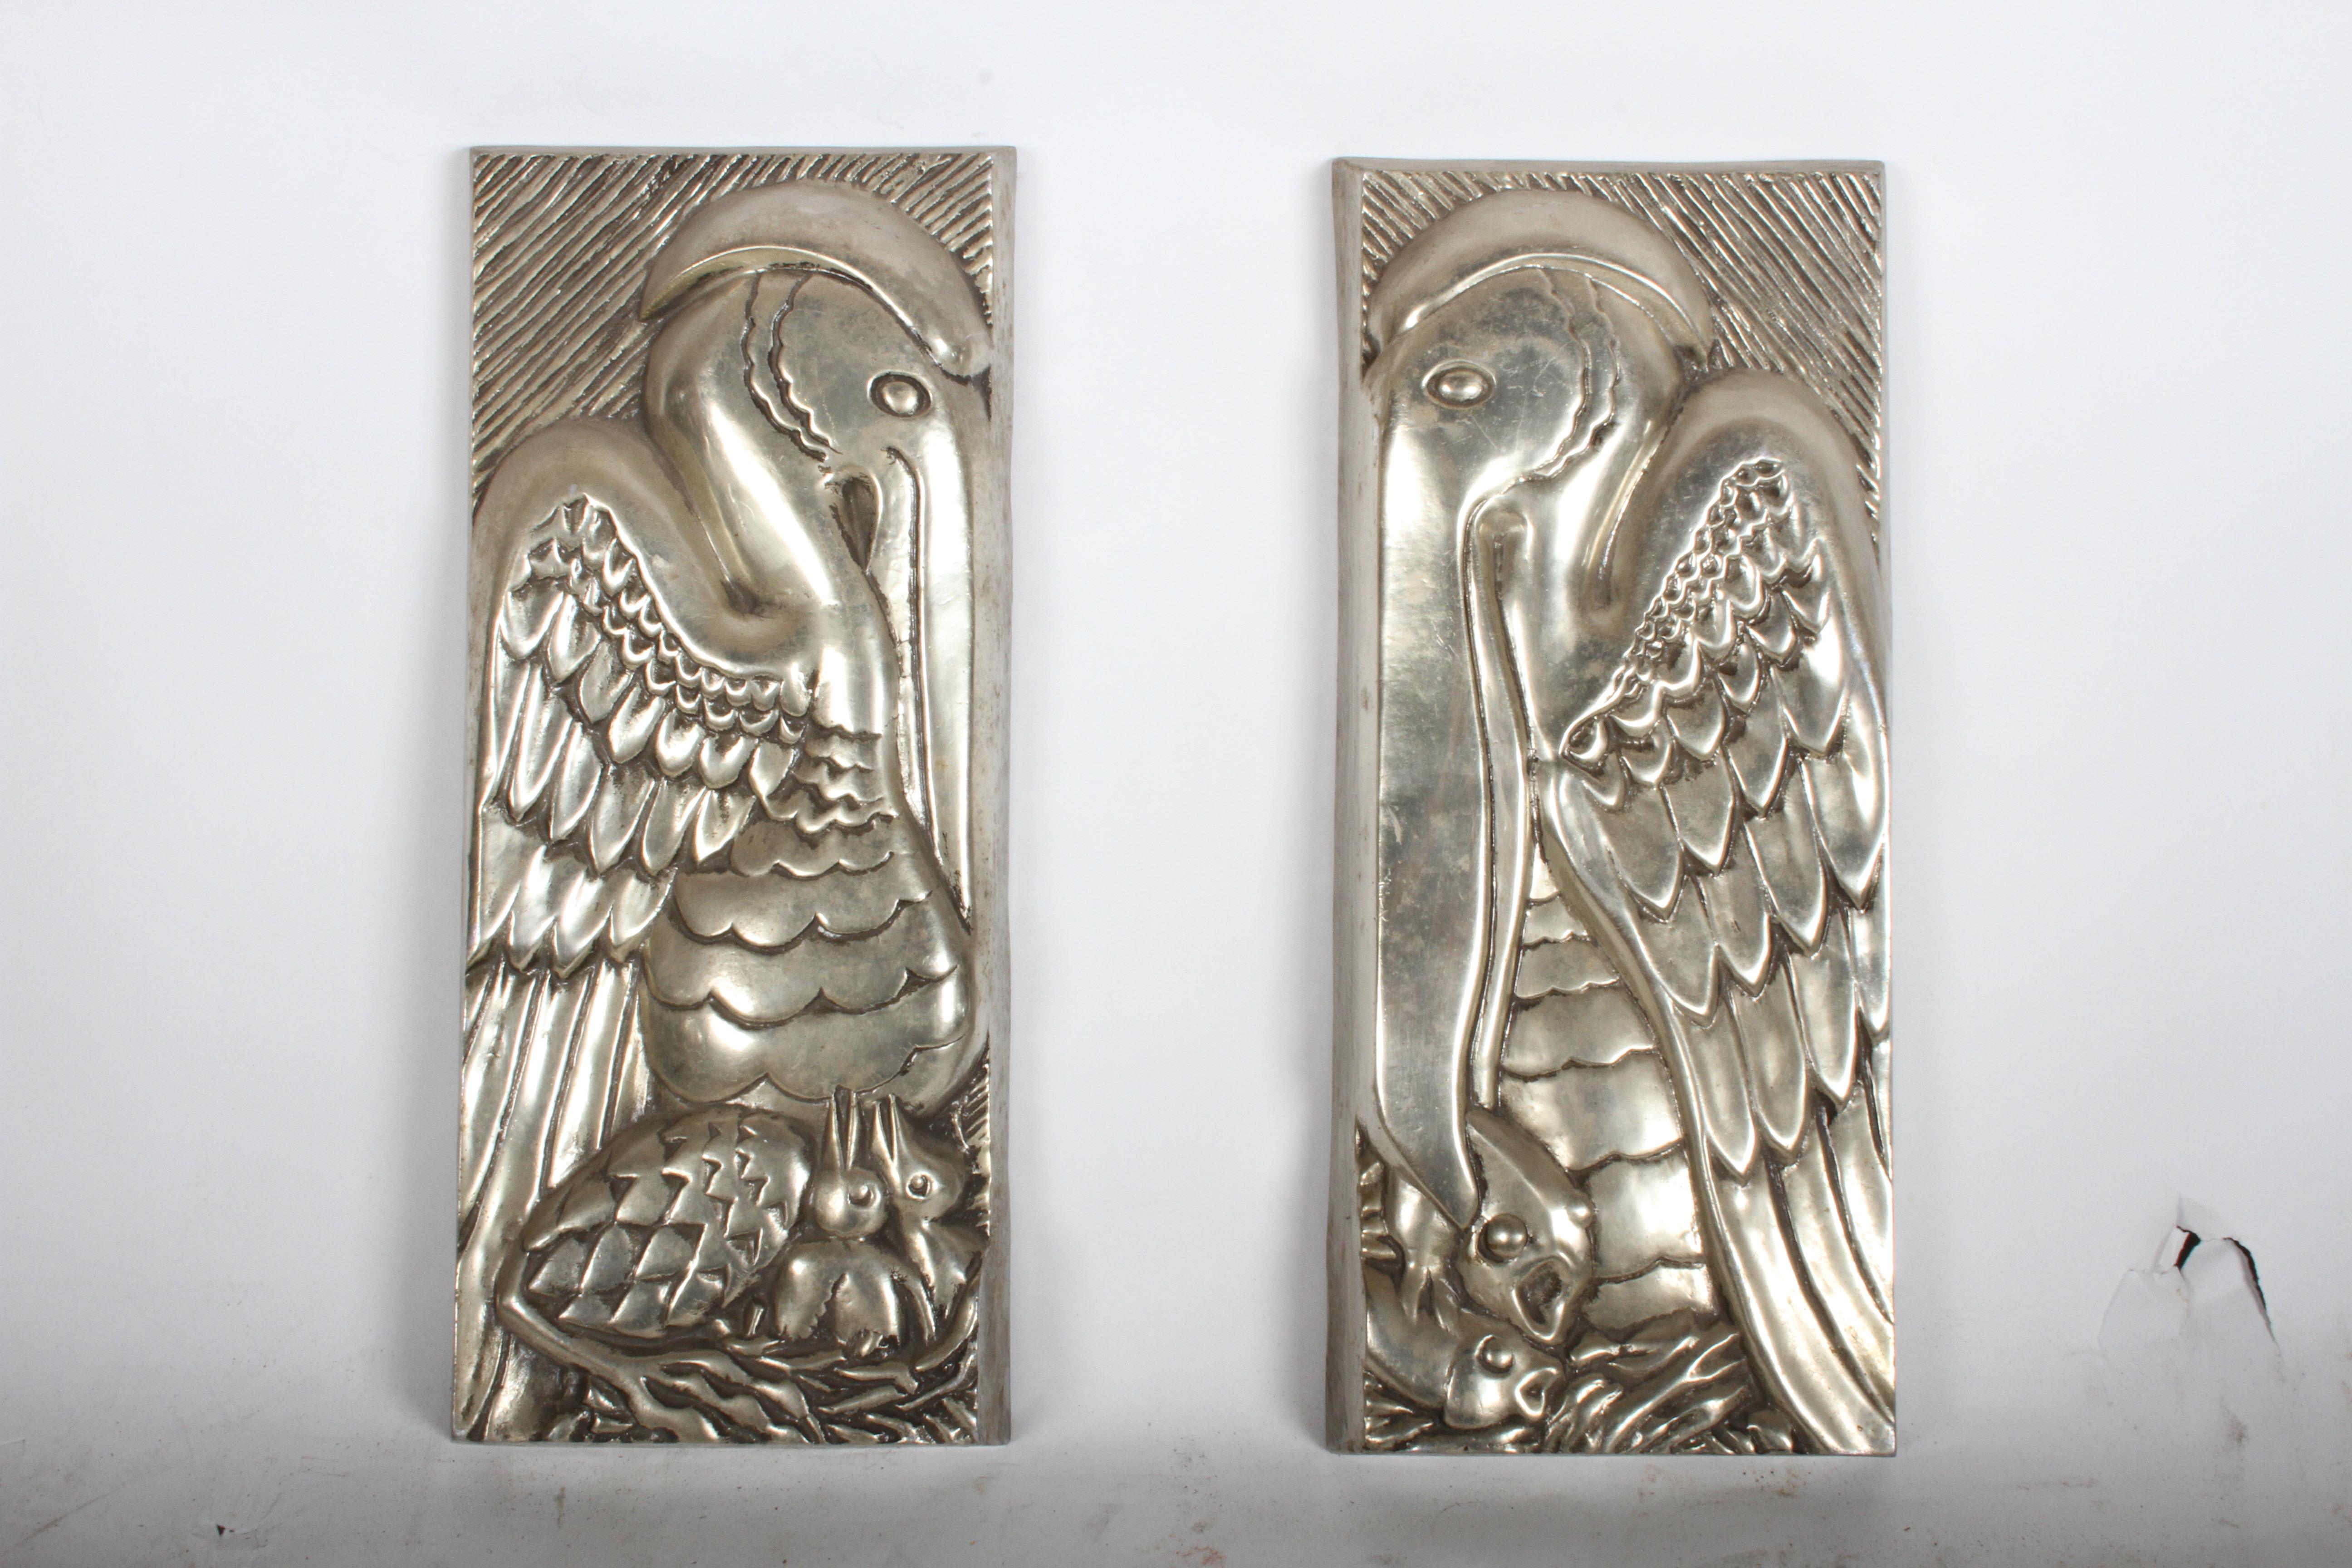 Rare and early Bruce COX Art Deco panels in aluminum done in relief. Pelicans with babies in their nest, plus catching fish. These pieces were made in the late 1930s or 1940s, when he focused on exotic nature themed pieces, in the 1950s-1960s he